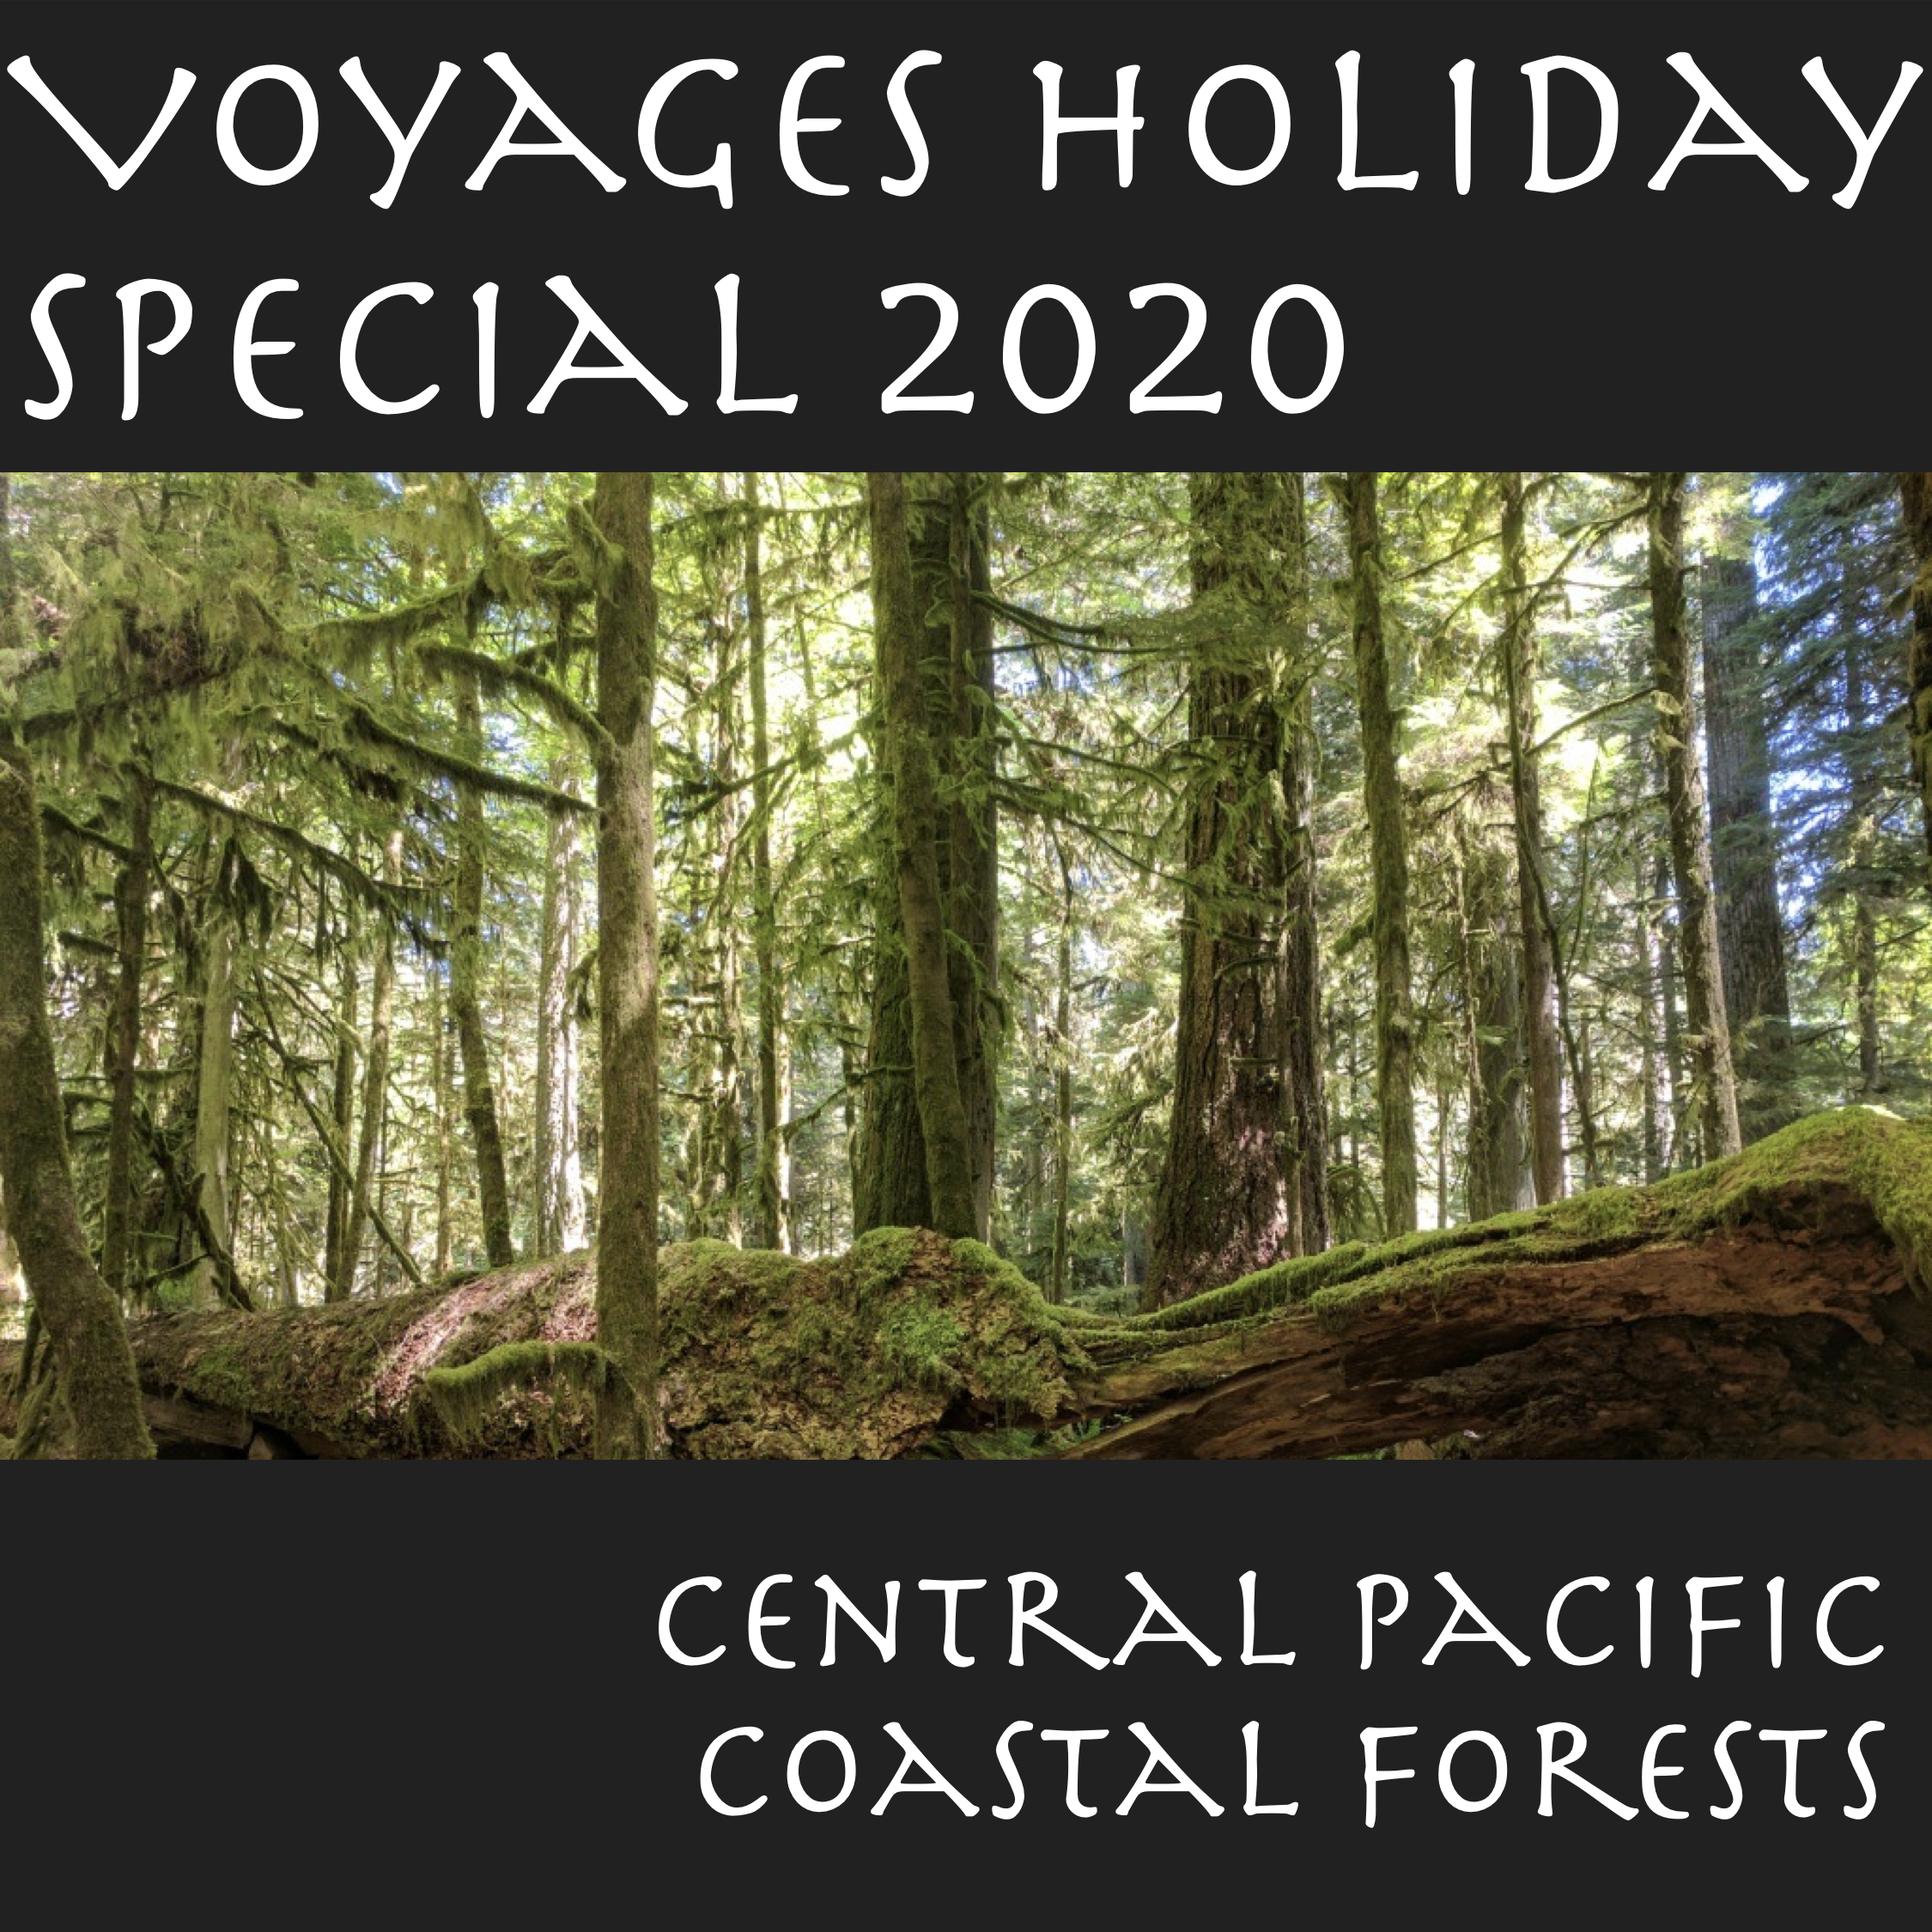 Central Pacific Coastal Forests - Holiday Special 2020